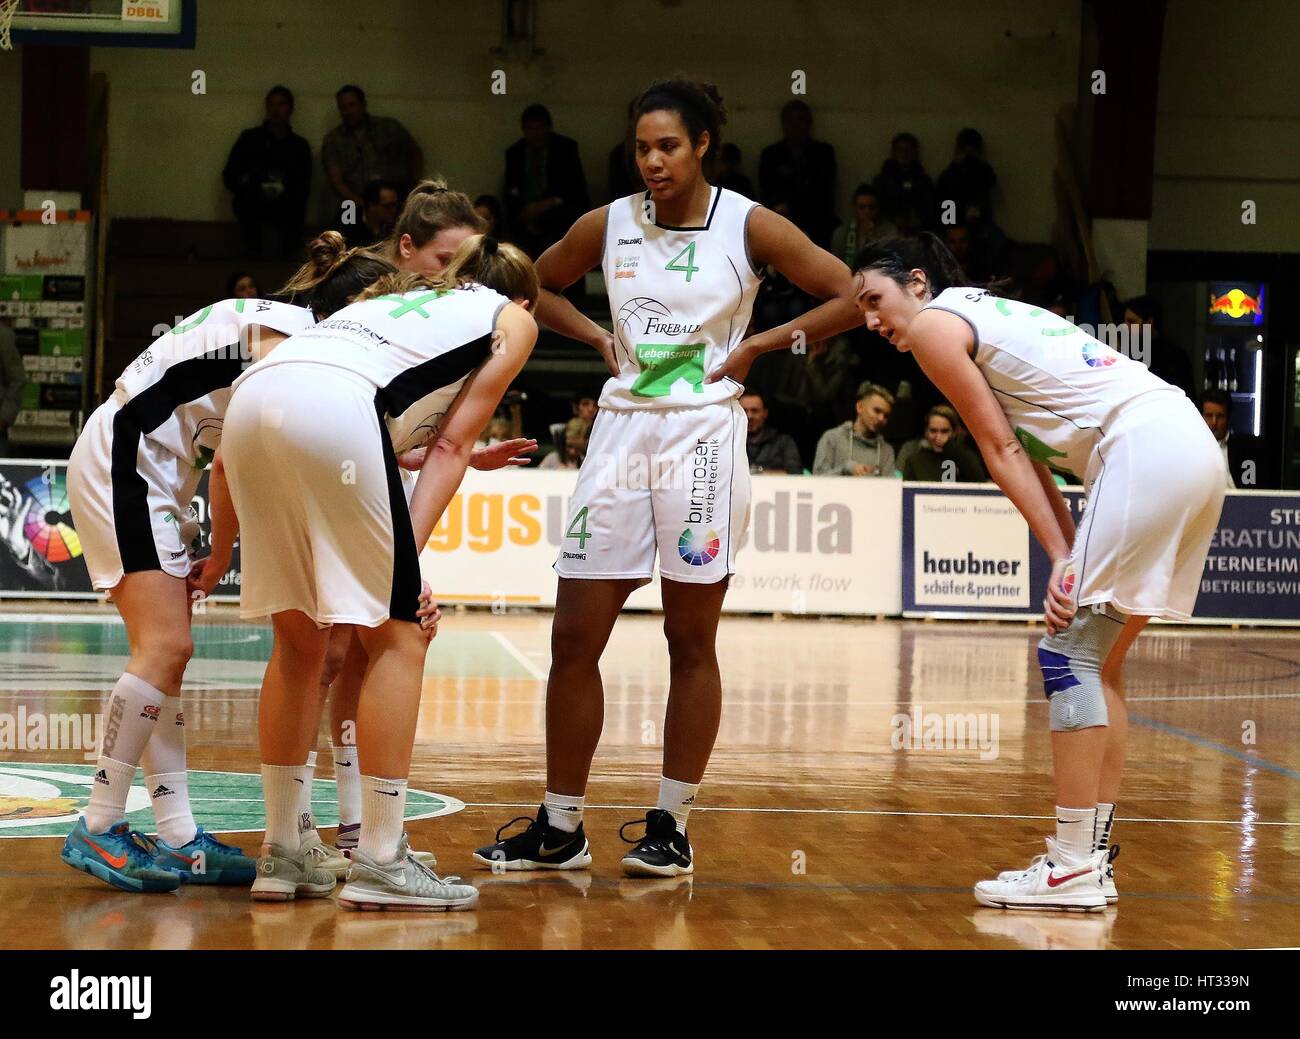 March 7, 2017 - second from right Alexx FORDE (Bad Aibling/USA), in the right Lindsay SHERBERT (Bad Aibling/USA), kurz vor dem Sieg.Woman-Basketball, 1. Bundesliga 2016/17, .Fireballs Bad Aibling vs BC Pharmaserv Marburg, .05.02.17, Bad Aibling, Fire Dome. Womans German Basketbal Leaguel, Alexx Forde, the 22 years old American woman basketball player of the German first league team of Bad Aibling was tested positiv for a medicine allowed in USA and prohibited in Germany. As a result the woman player was suspendet from German Basketball Union. (Credit Image: © Wolfgang Fehrmann via ZUMA Wire Stock Photo